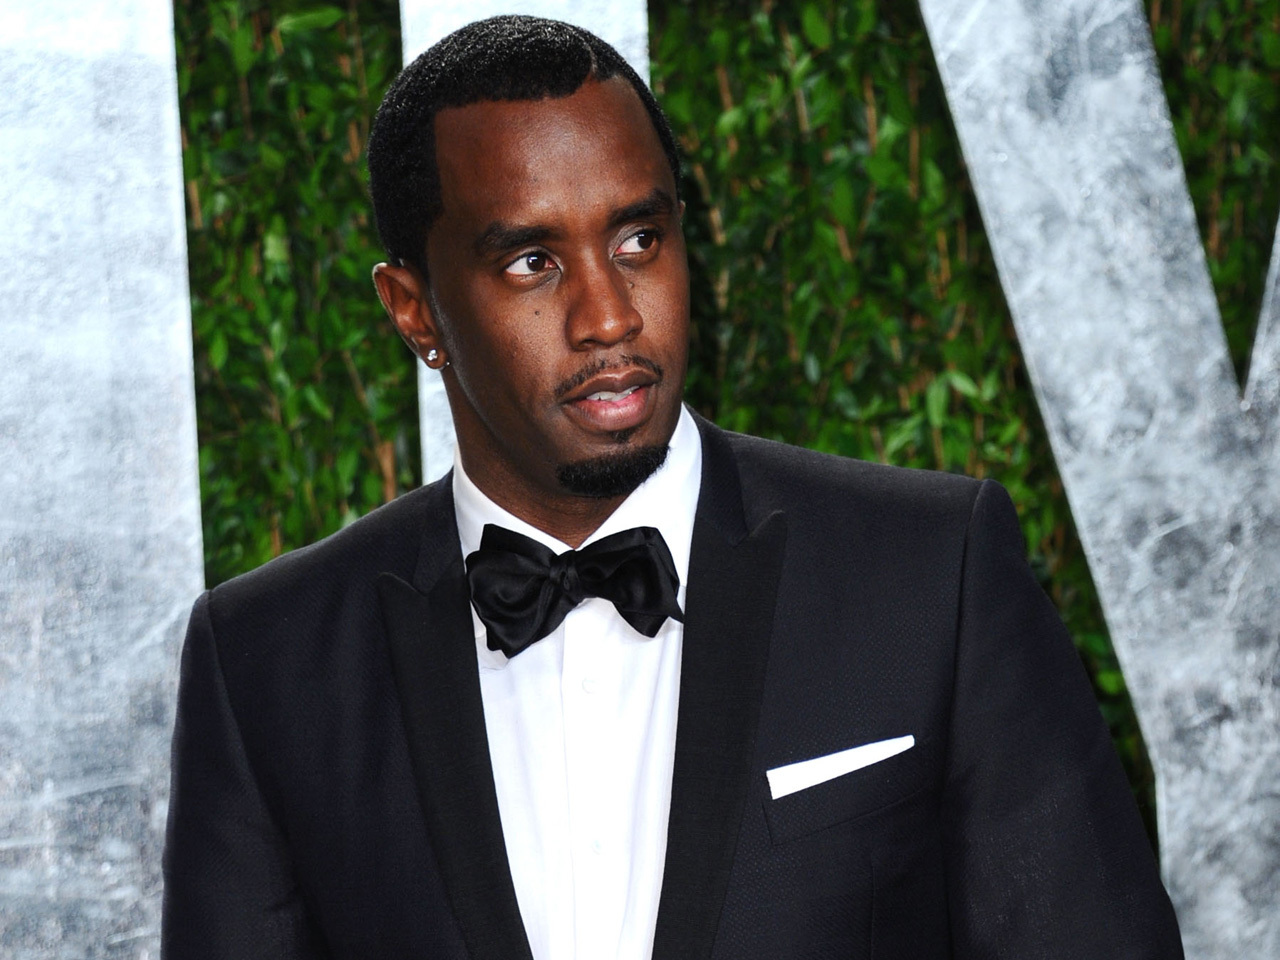 Accused trespasser makes himself at home at Diddy's digs - CBS News